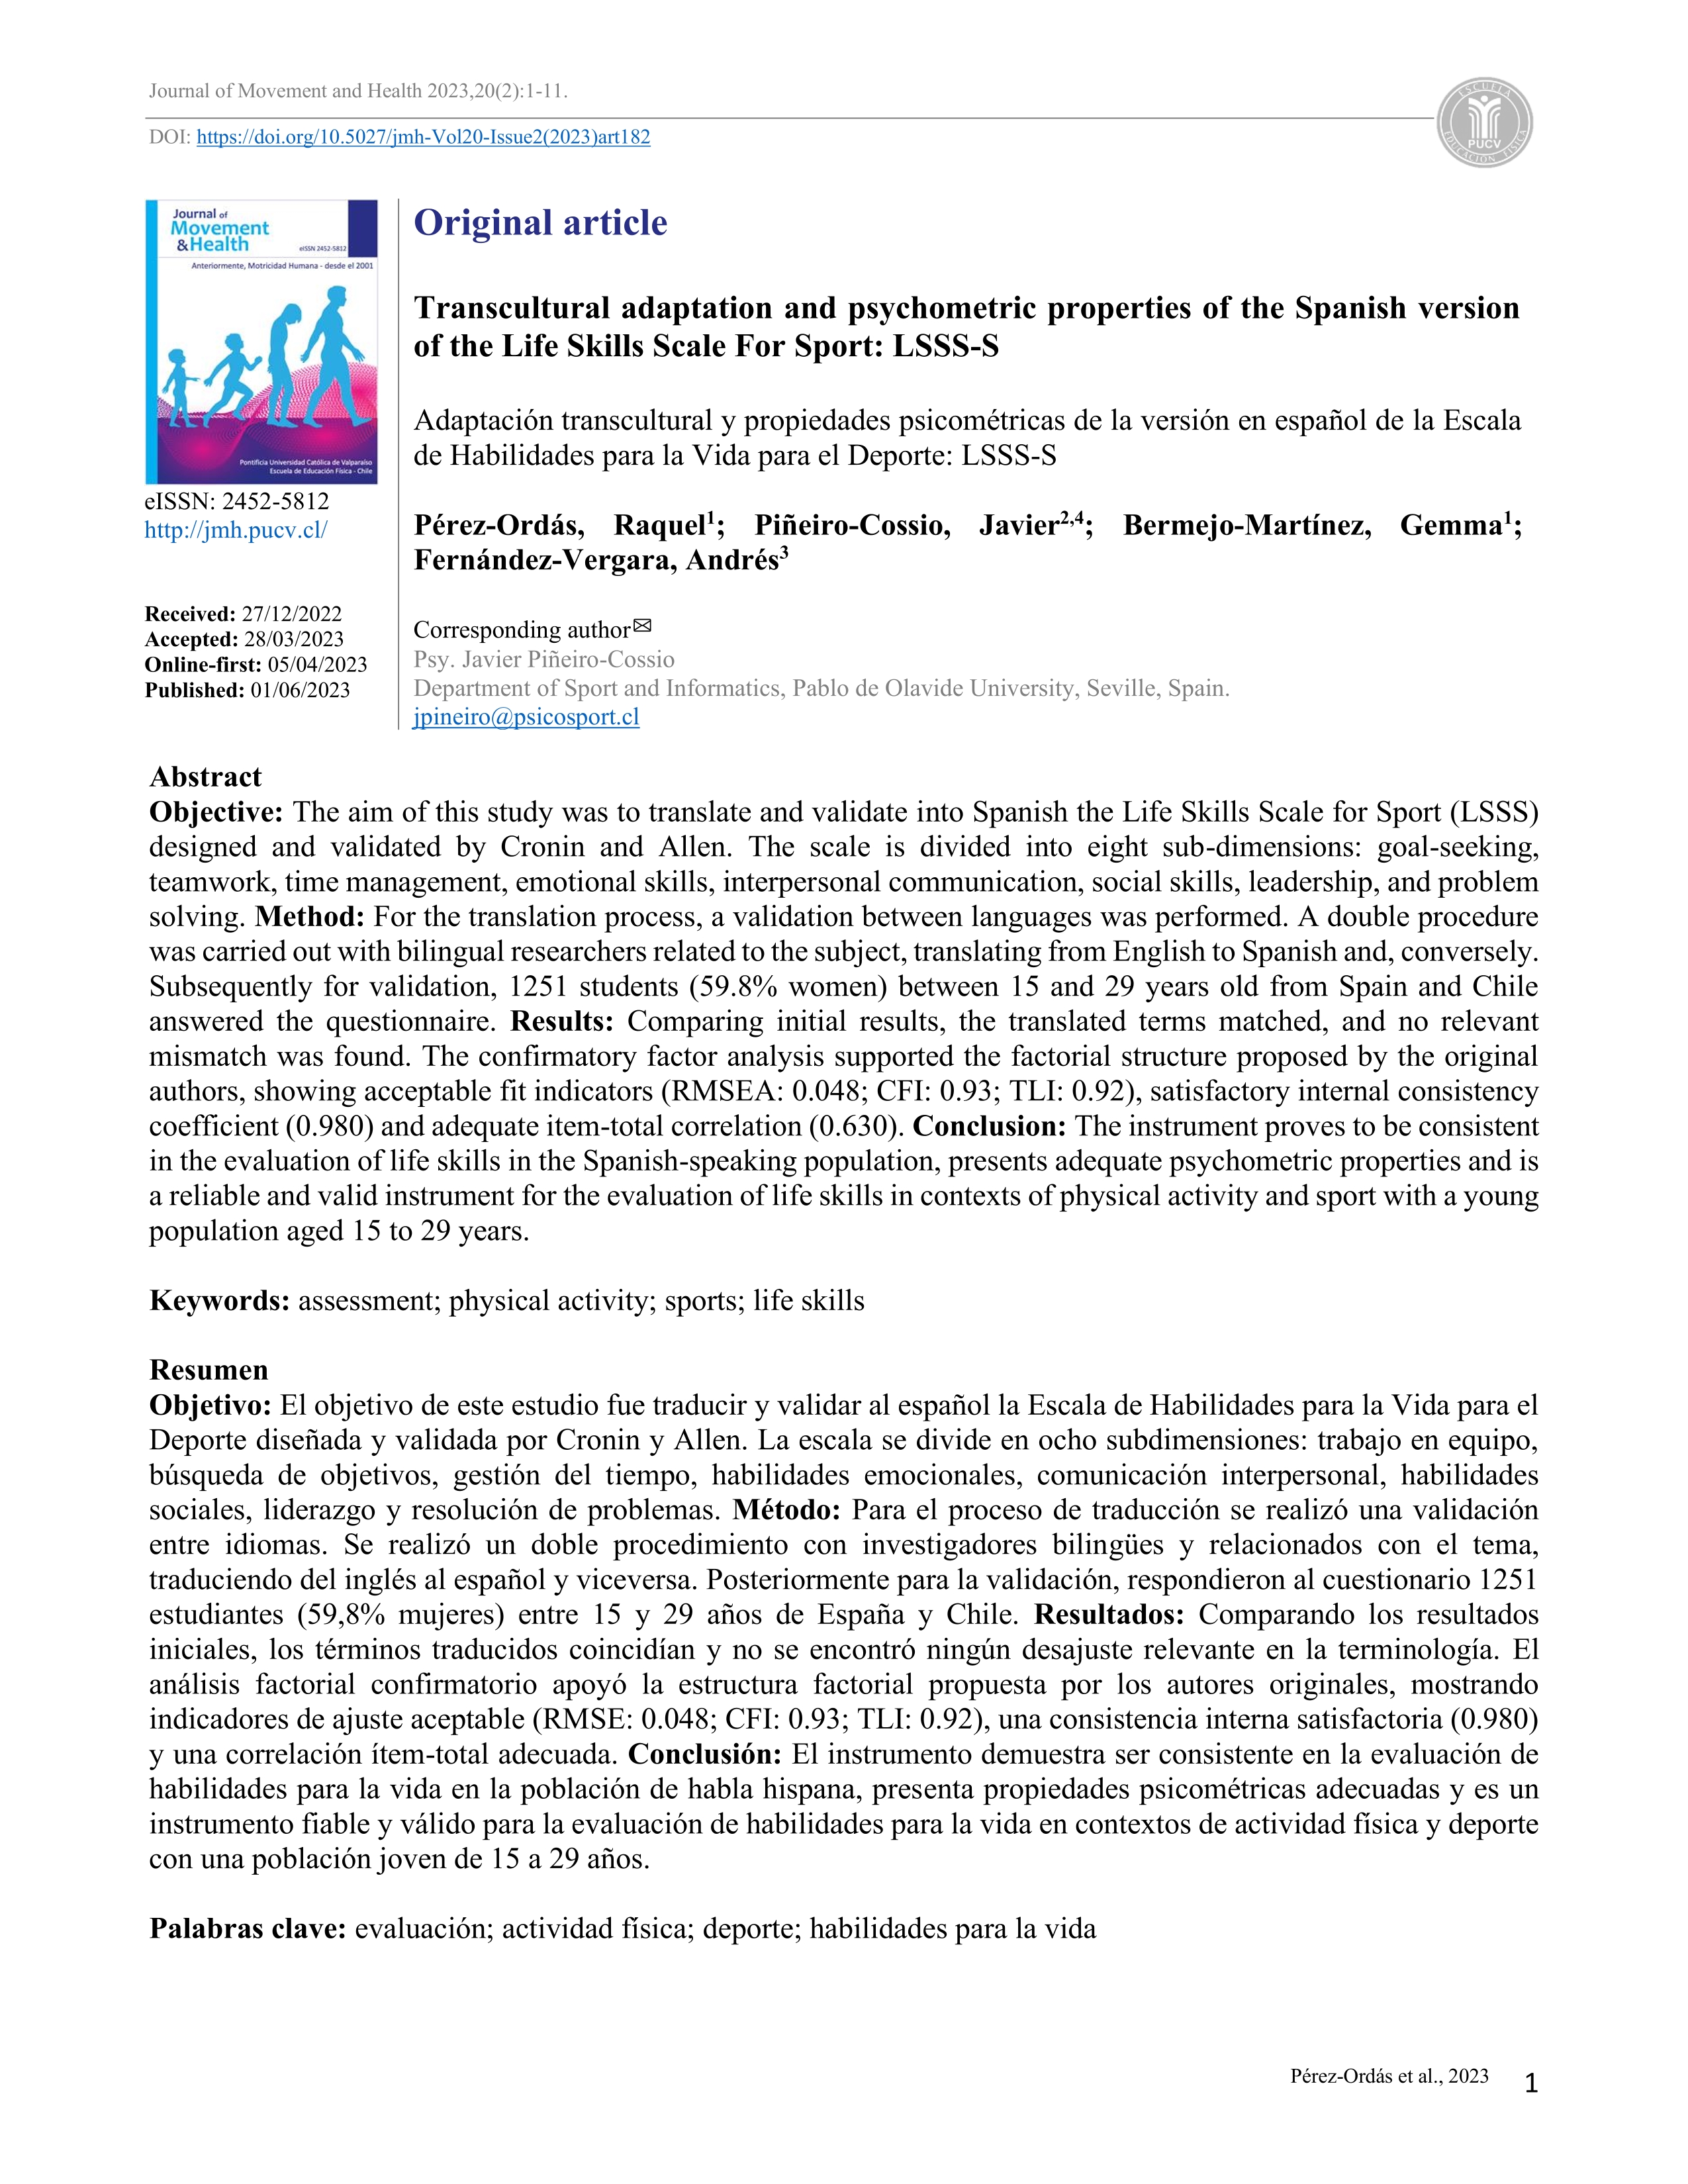 Transcultural adaptation and psychometric properties of the Spanish version of the Life Skills Scale For Sport: LSSS-S